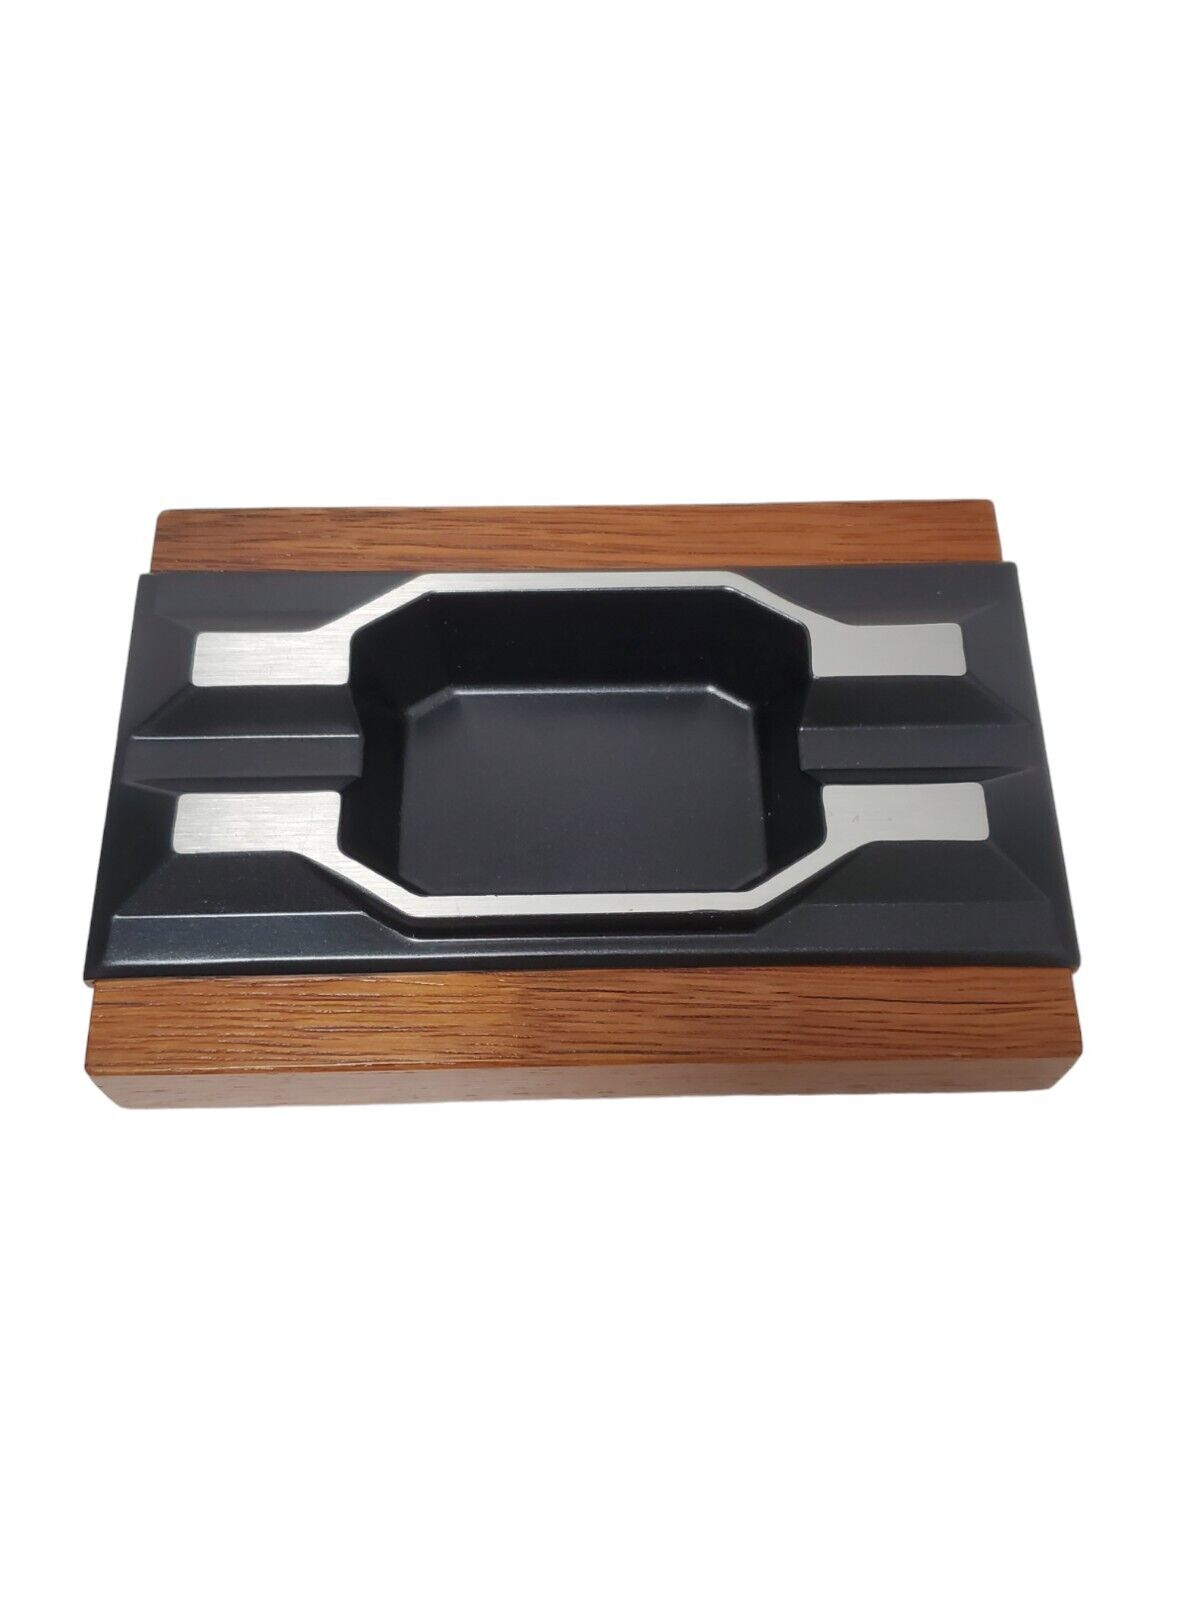 Home Supplies Ashtray, Large Portable Metal Desk Compatible w/ Solid Wood Ashtra